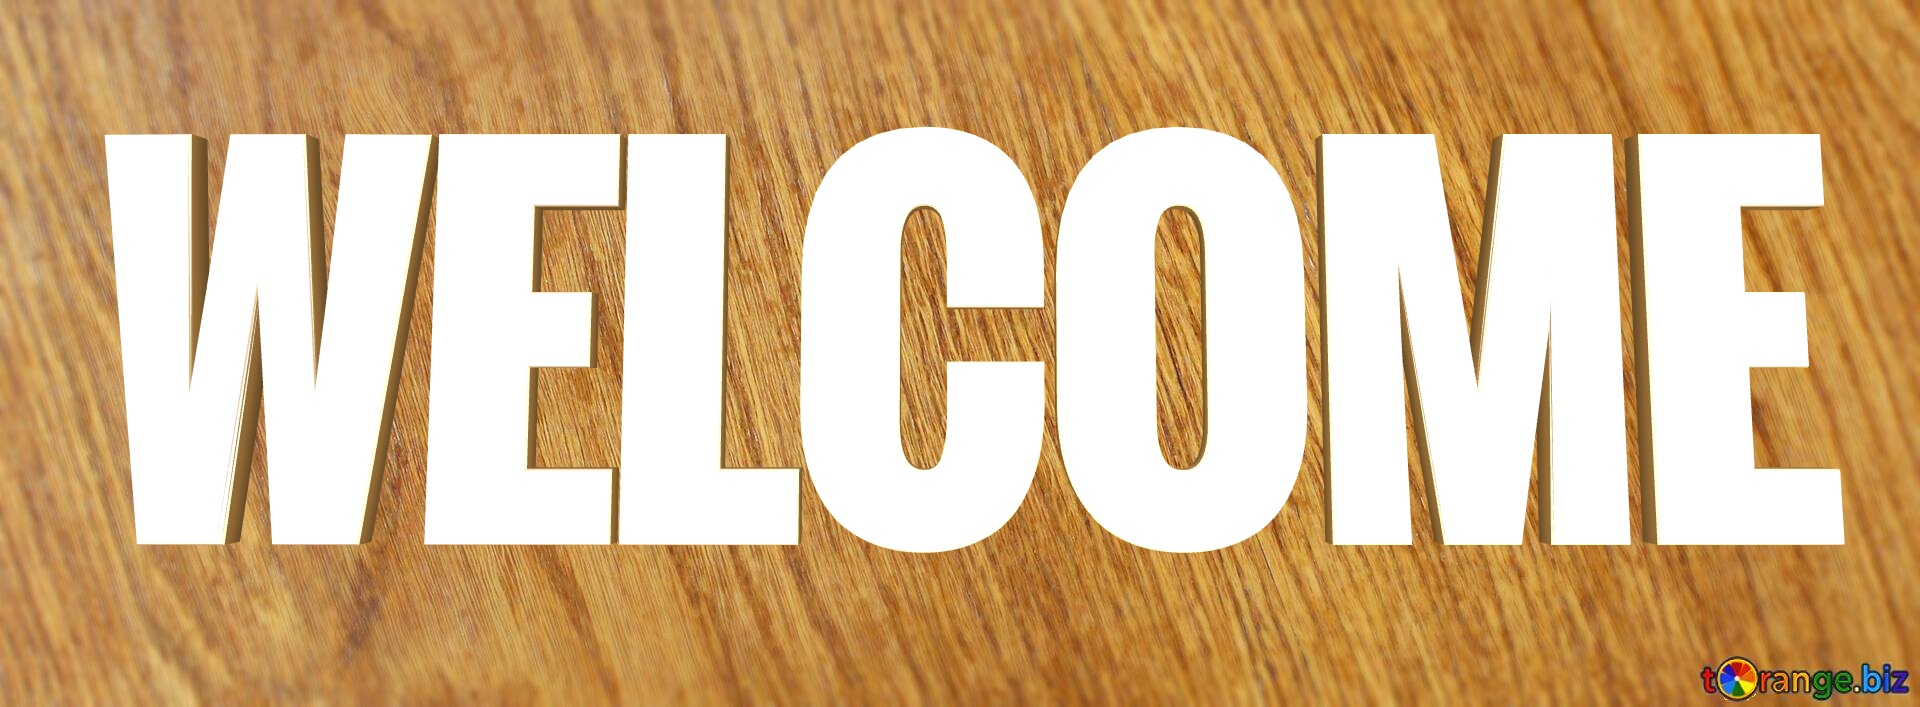 Wooden sign welcome Cover. Wood texture. №0